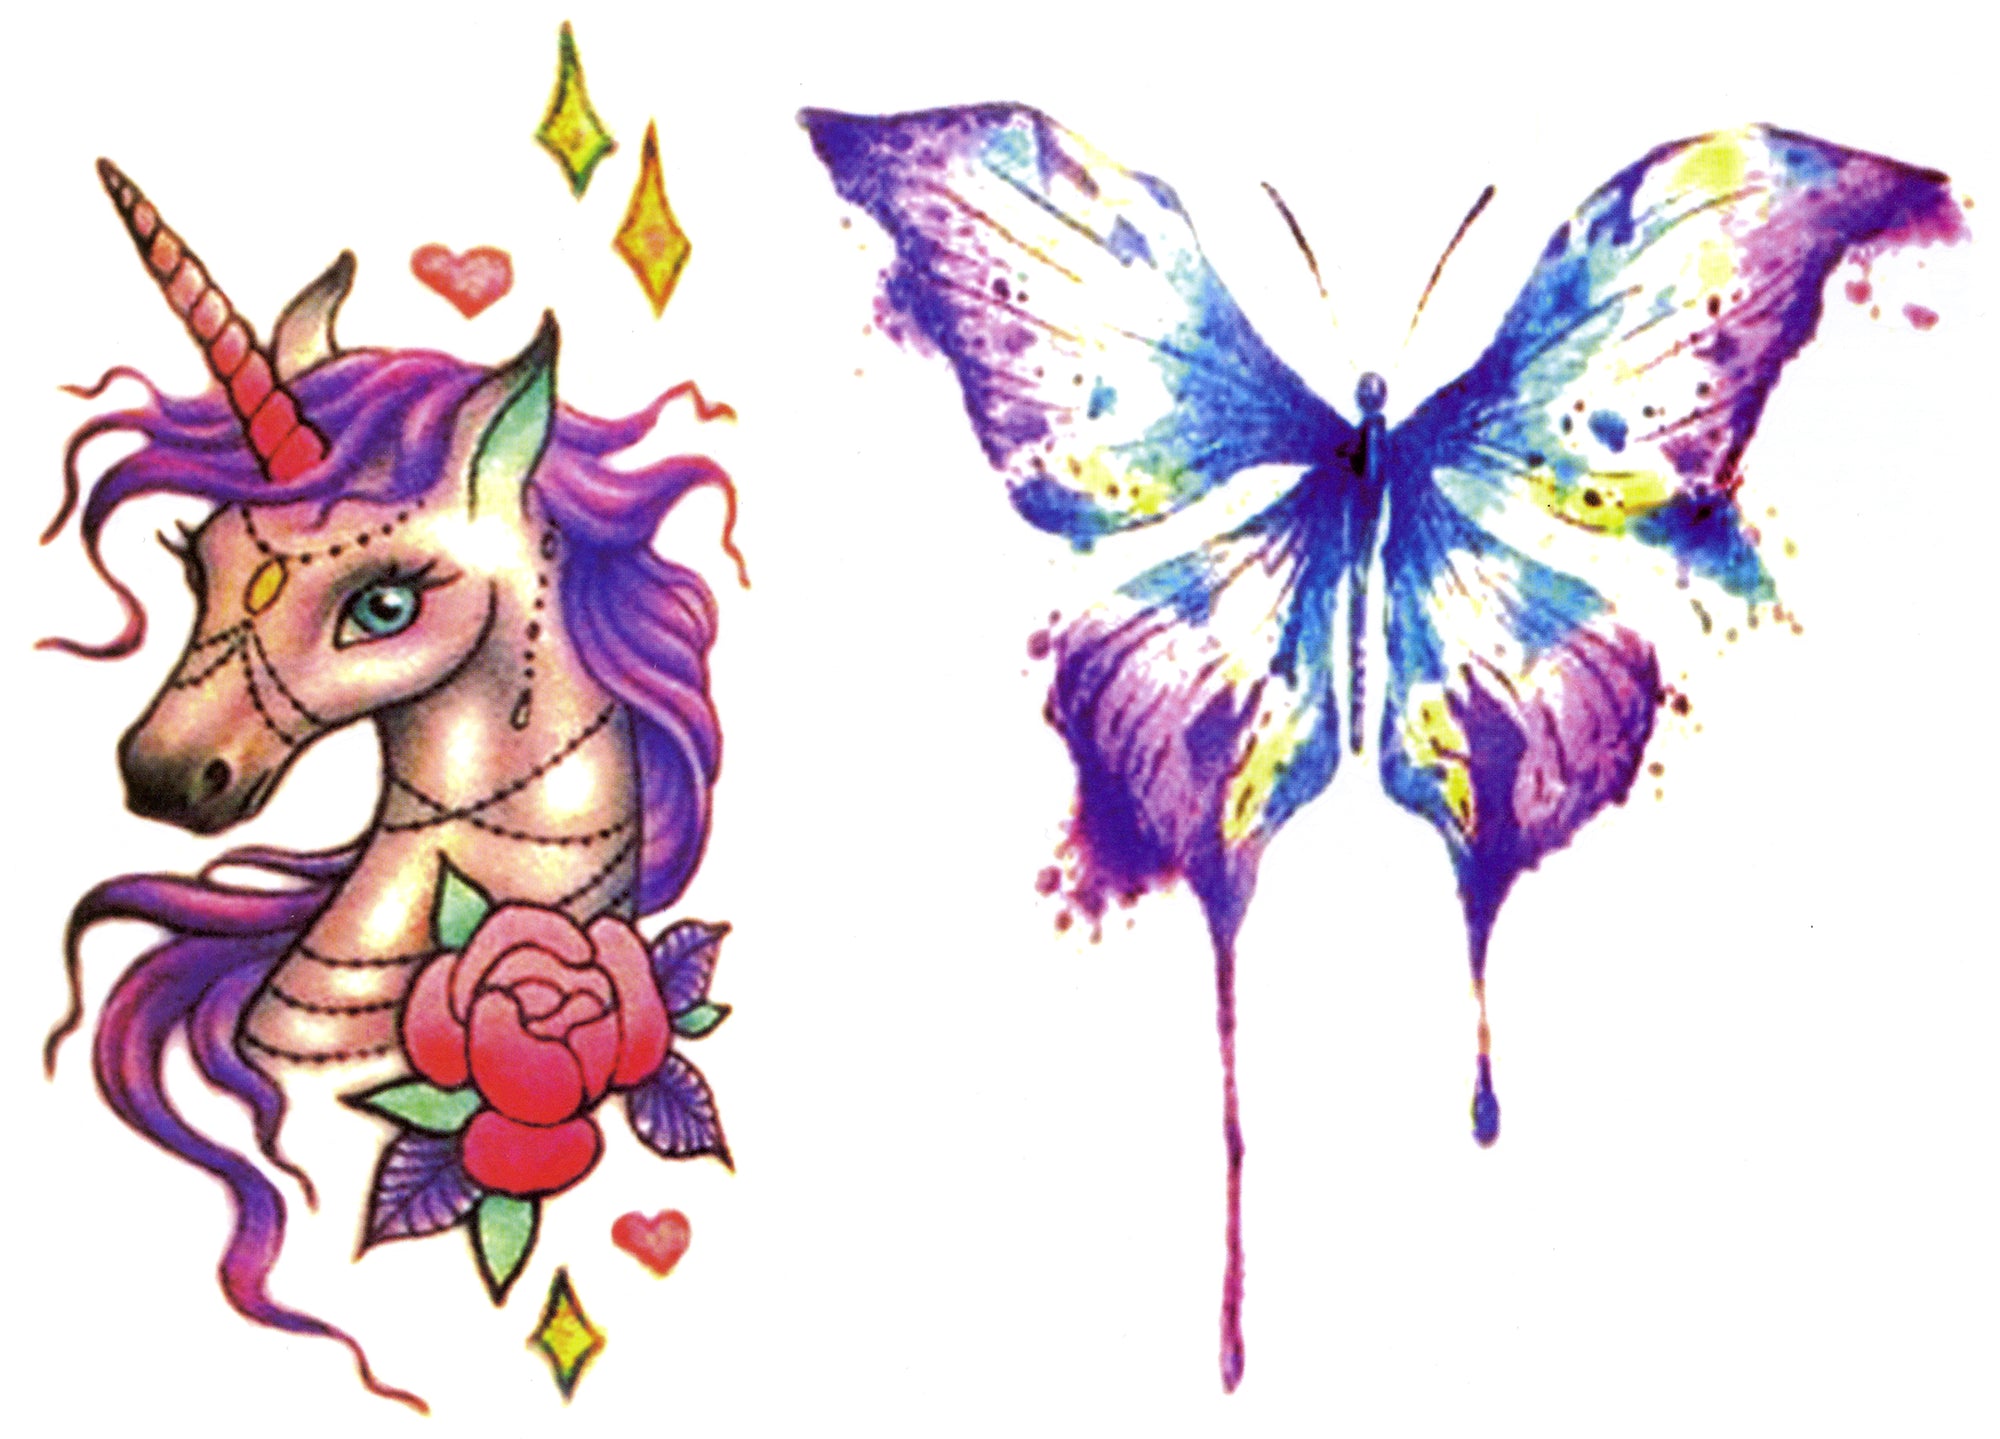 Unicorn and Butterfly 6" x 8 1/4" Waterproof Temporary Tattoos